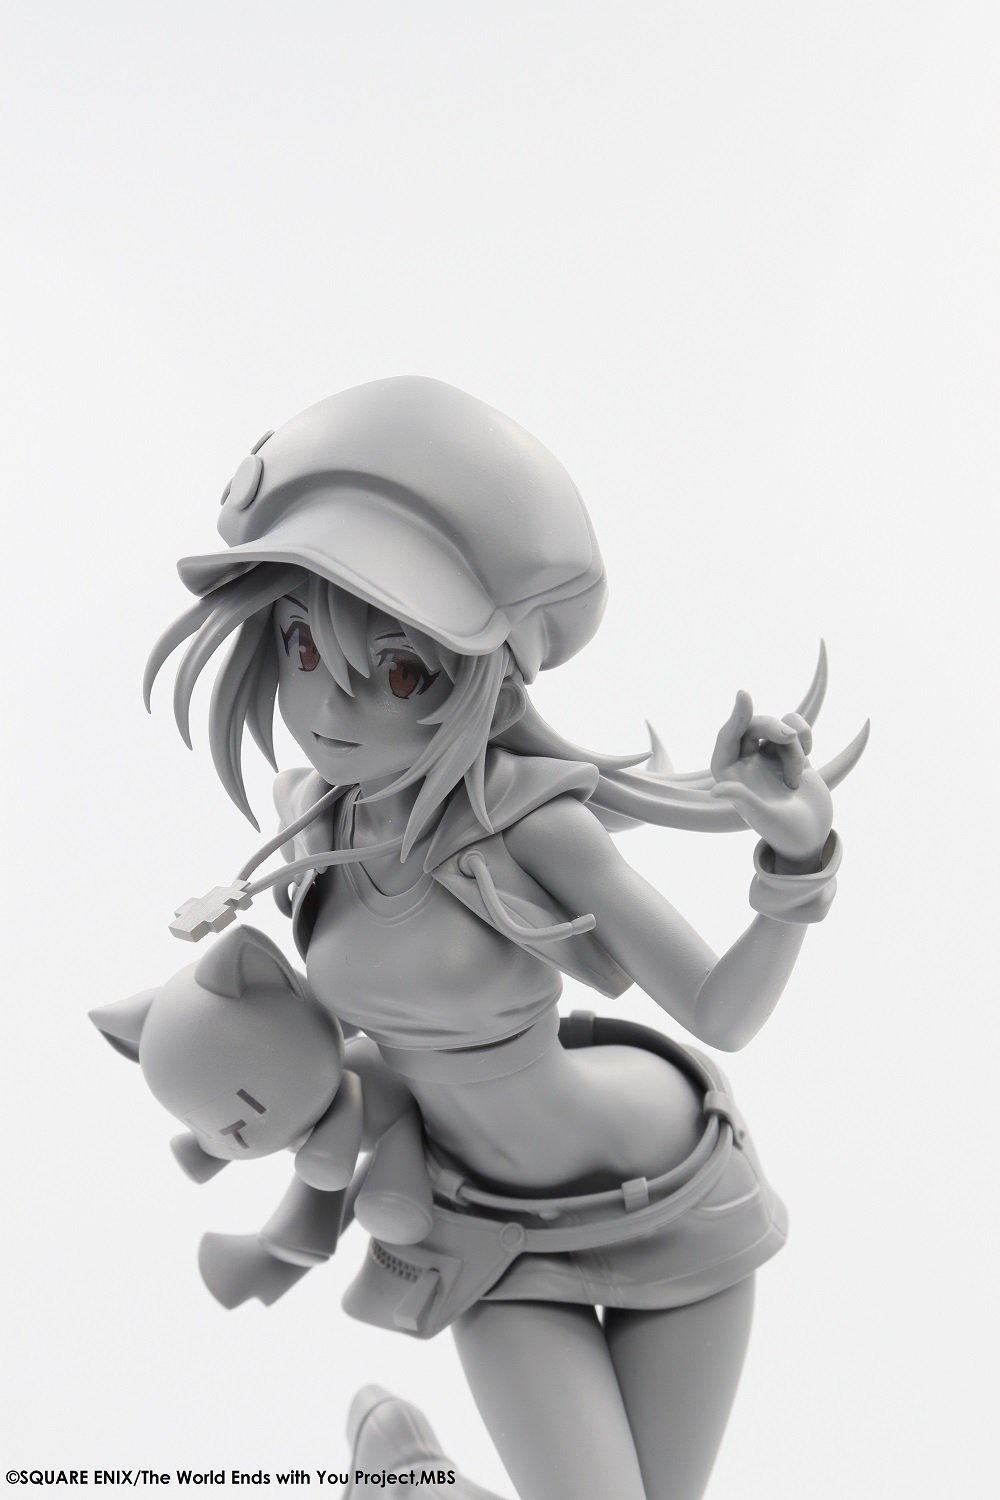 The World Ends With You - Shiki Misaki Figure image count 4